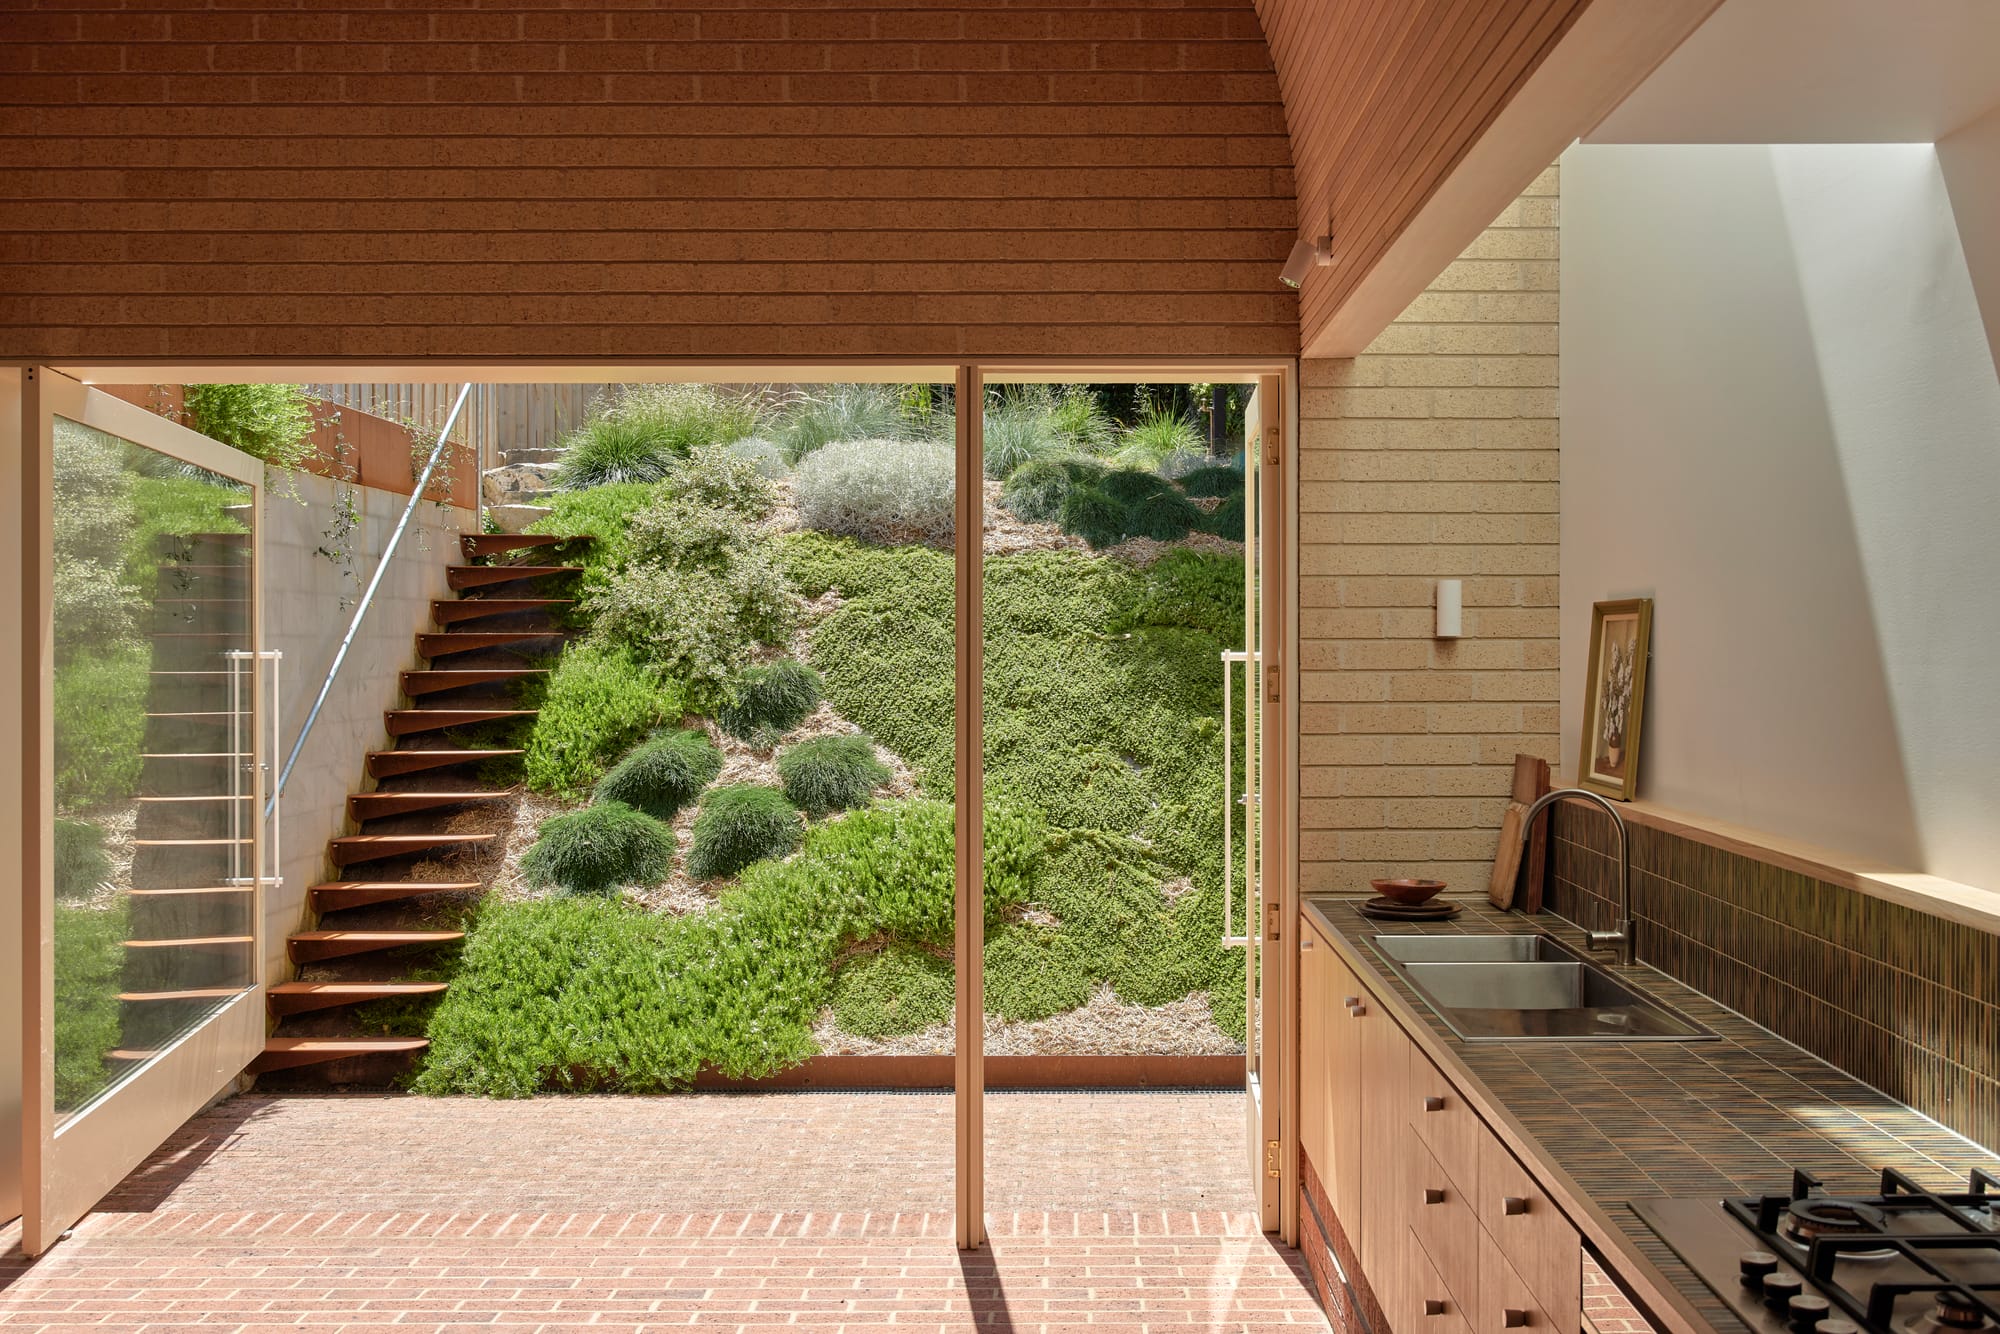 Harriet's House by SO:Architecture. Photography by Sean Fennessy. Landscape of transition from inside to out with brick flooring throughout. Sloping garden with staircase.